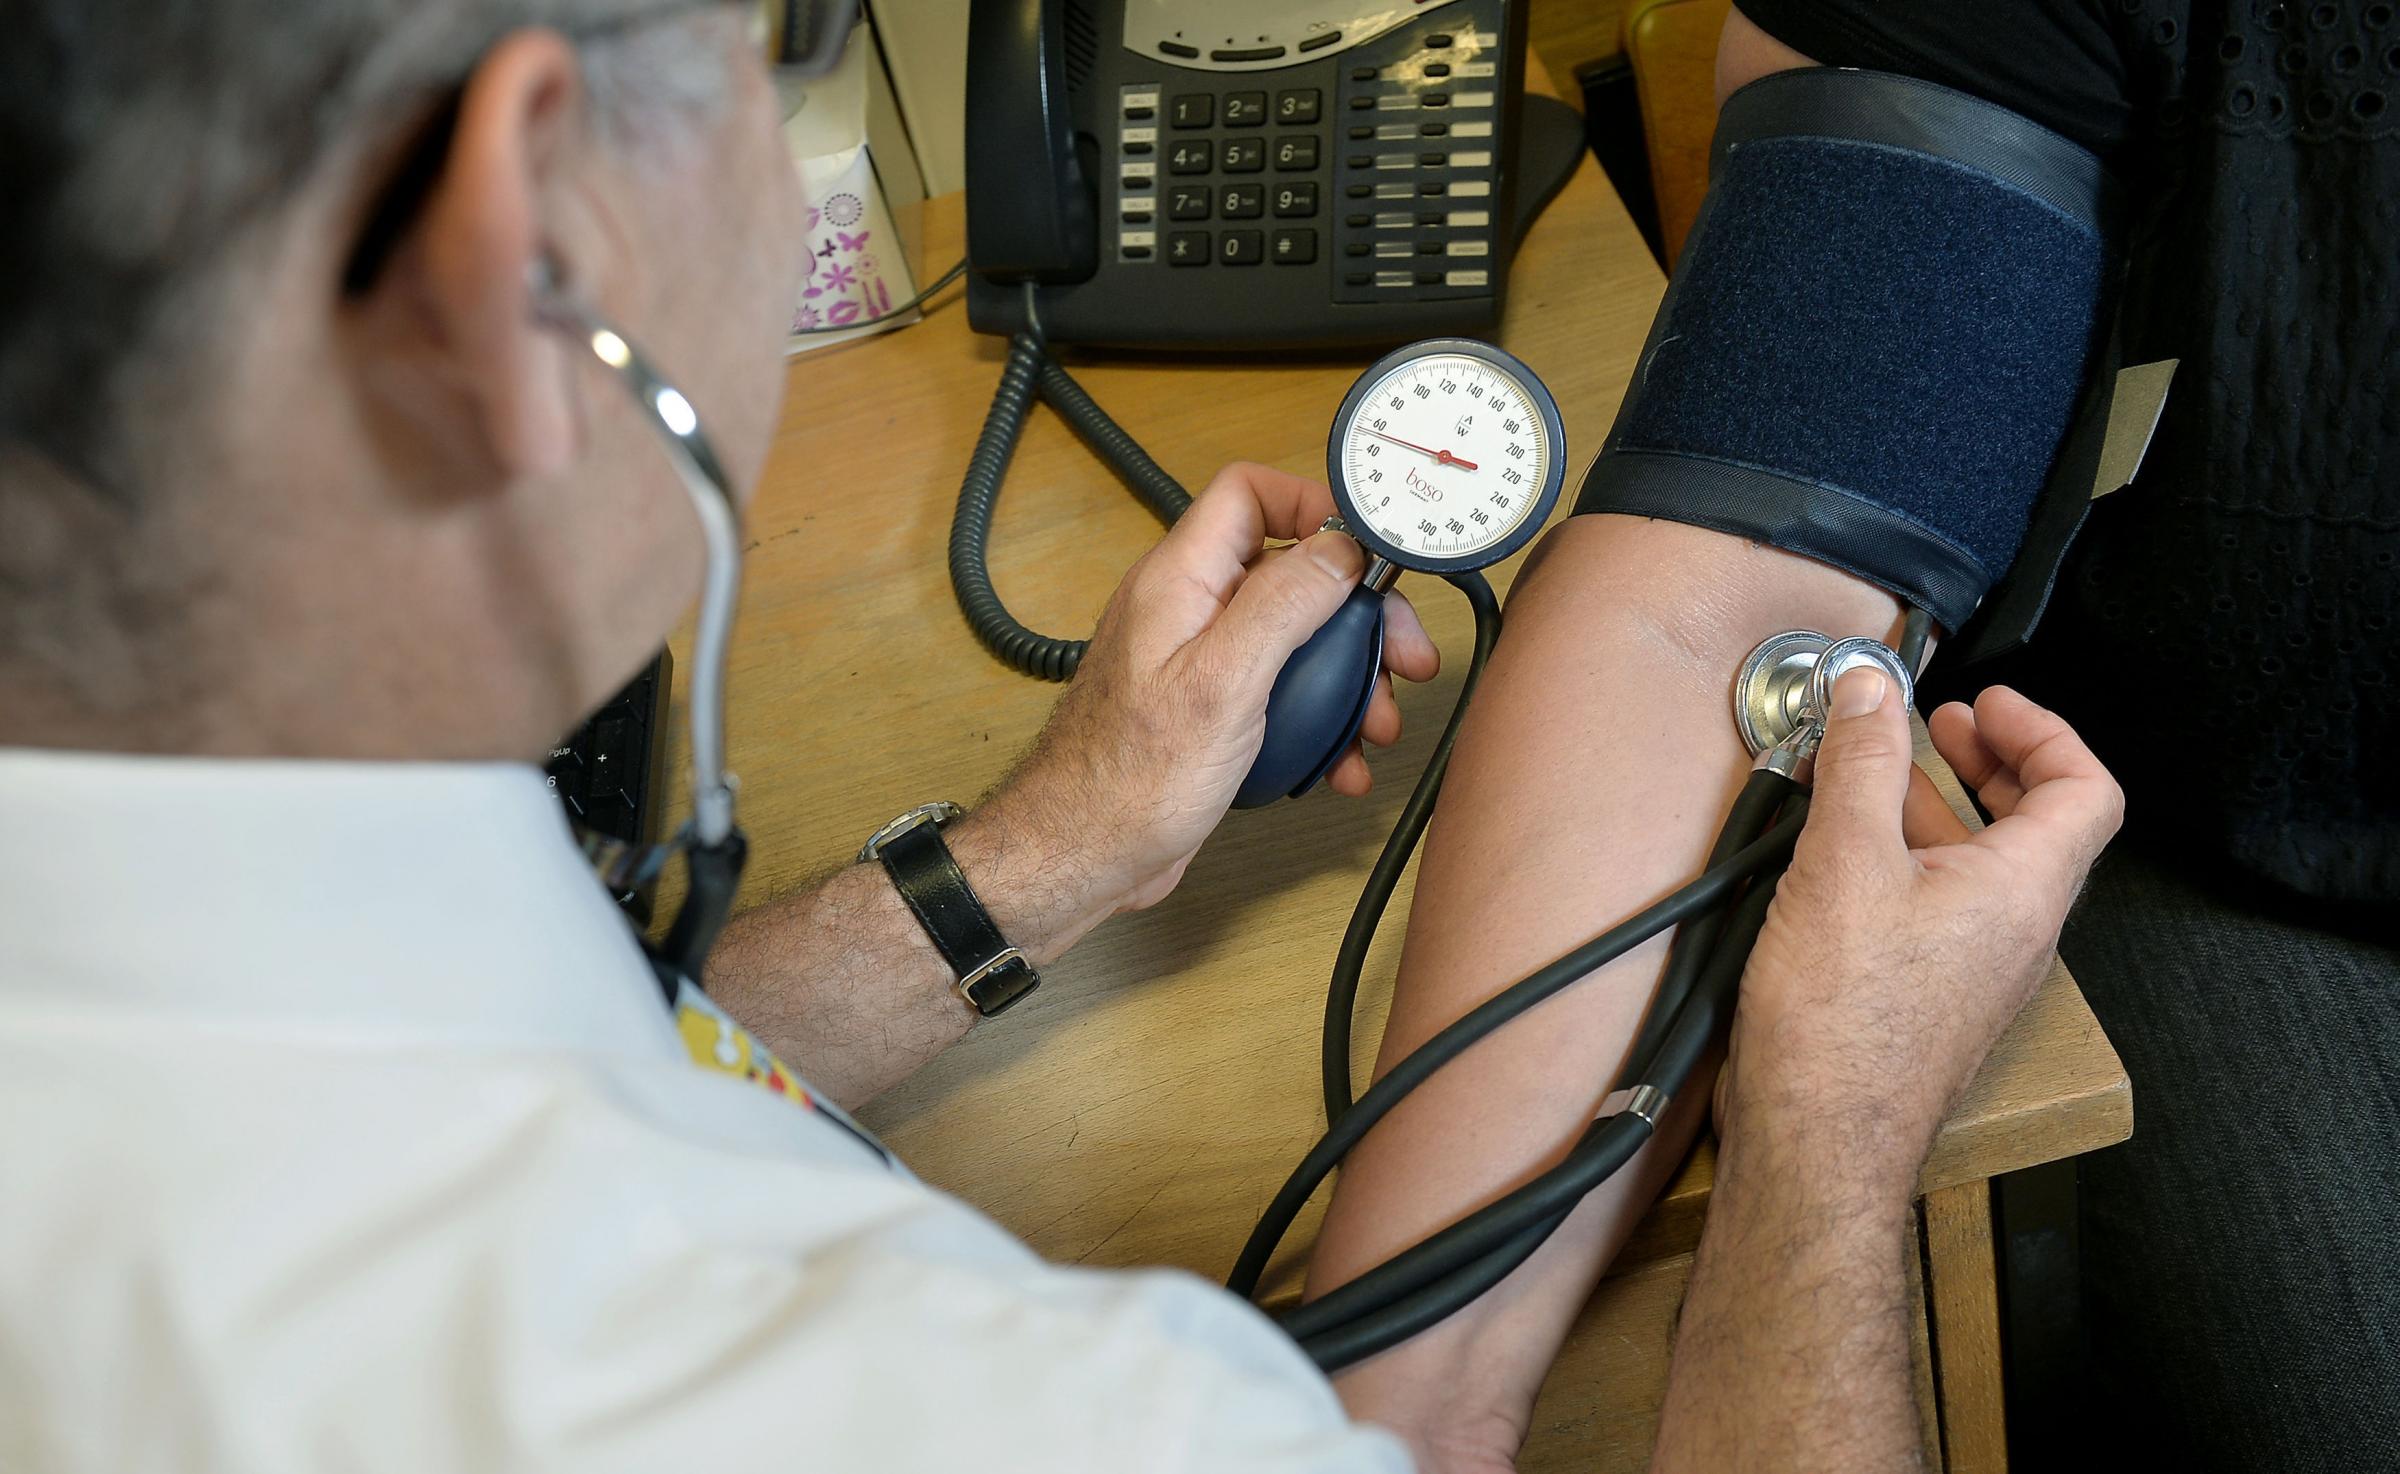 Research shows patients in Warrington forced to wait 10 days on average to see GP (Image: PA)